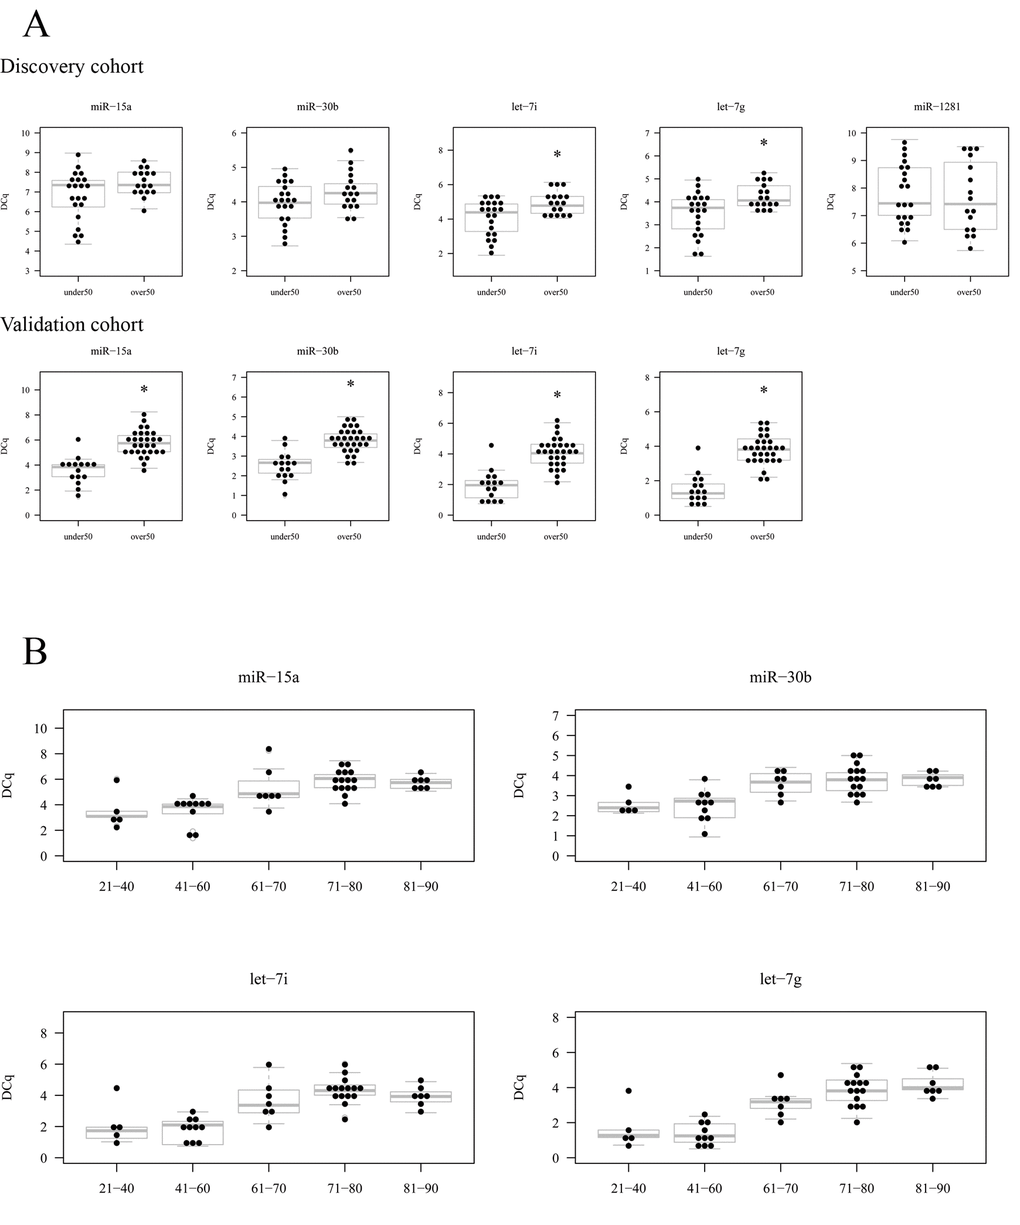 Results of the validation experiment of candidate miRNA. (A) The expression of candidate miRNA in elder (over 50) and young (under 50) is shown measured by RT-qPCR in the discovery cohort (upper row) and validation cohort (lower row). In the validation cohort miR-1281 was not analysed. (B) The expression of the validated 4 miRNA with age ranges.